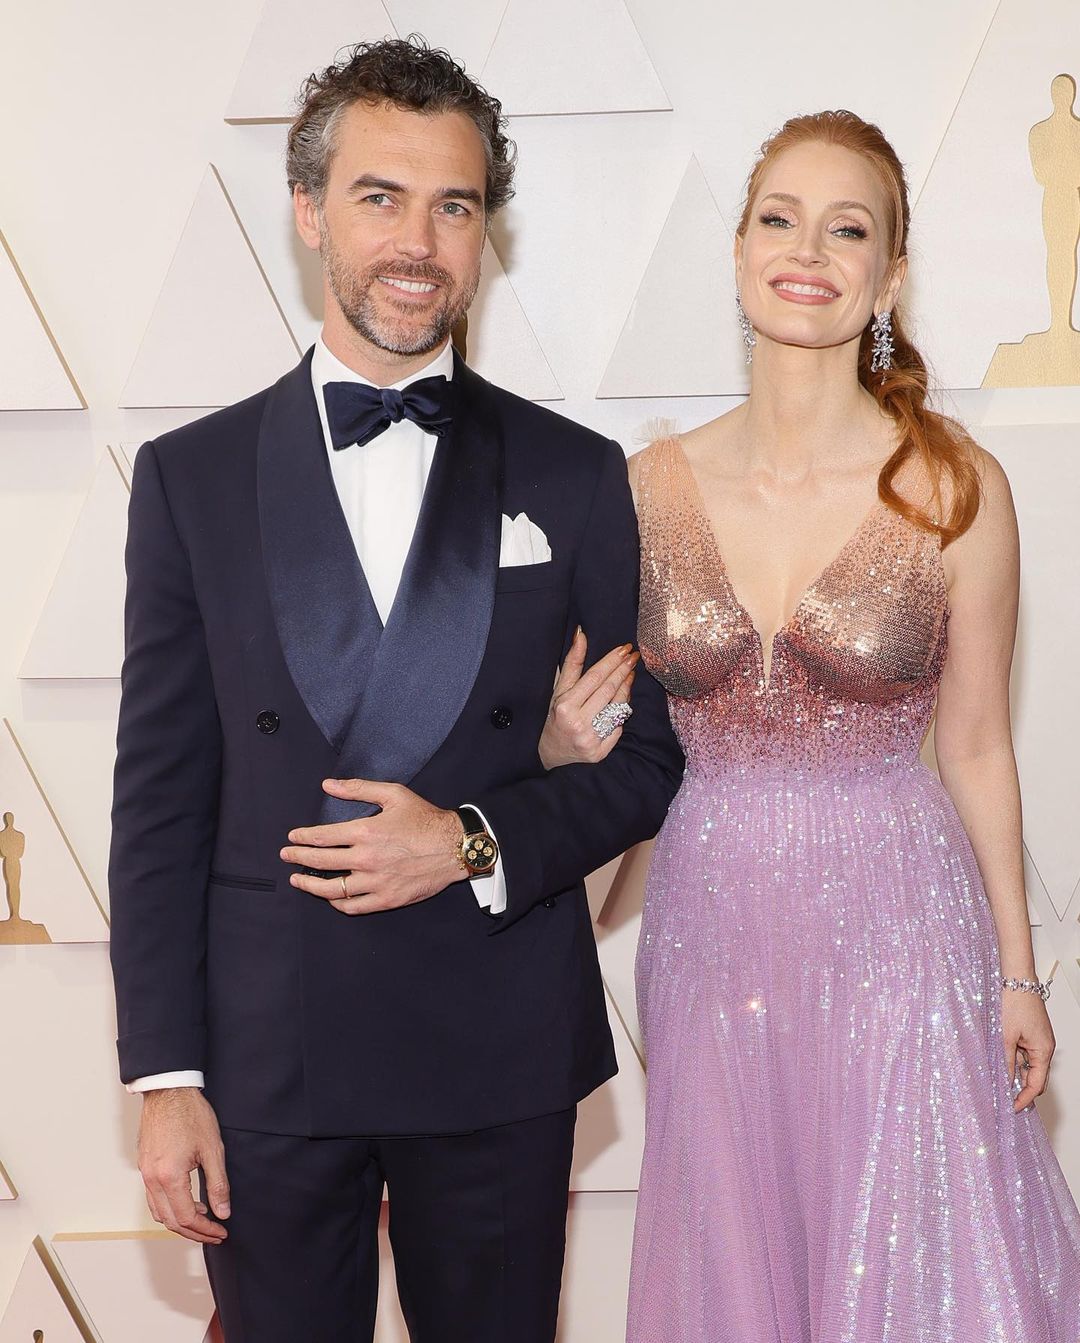 Jessica Chastain and husband Gian Luca Passi de Preposulo looked gorgeous